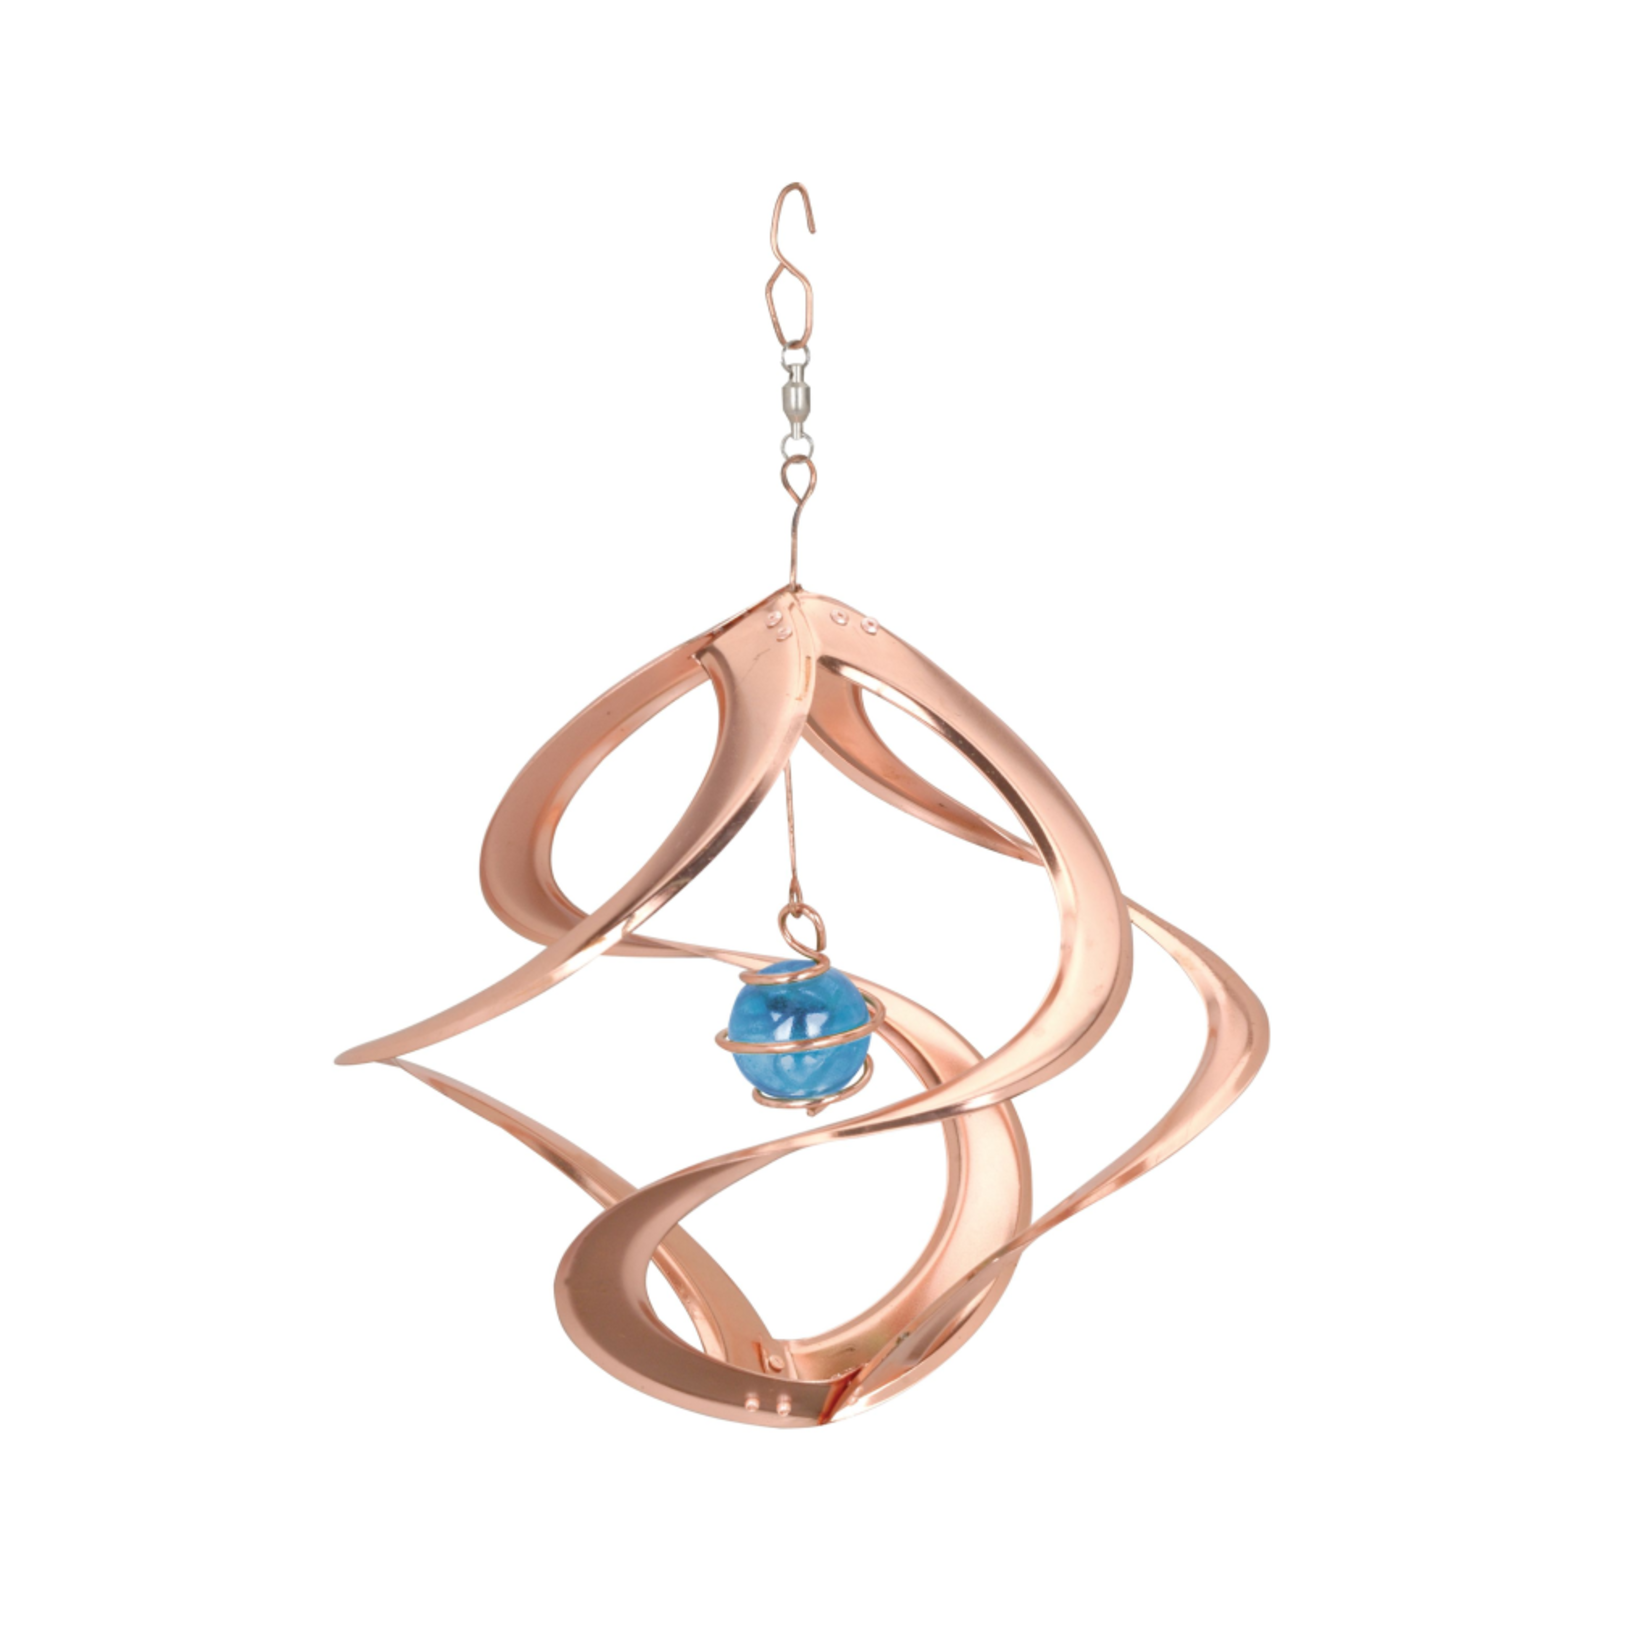 Bear Den Helixes Hanging Helix - 11 Inch Copper with Blue Glass